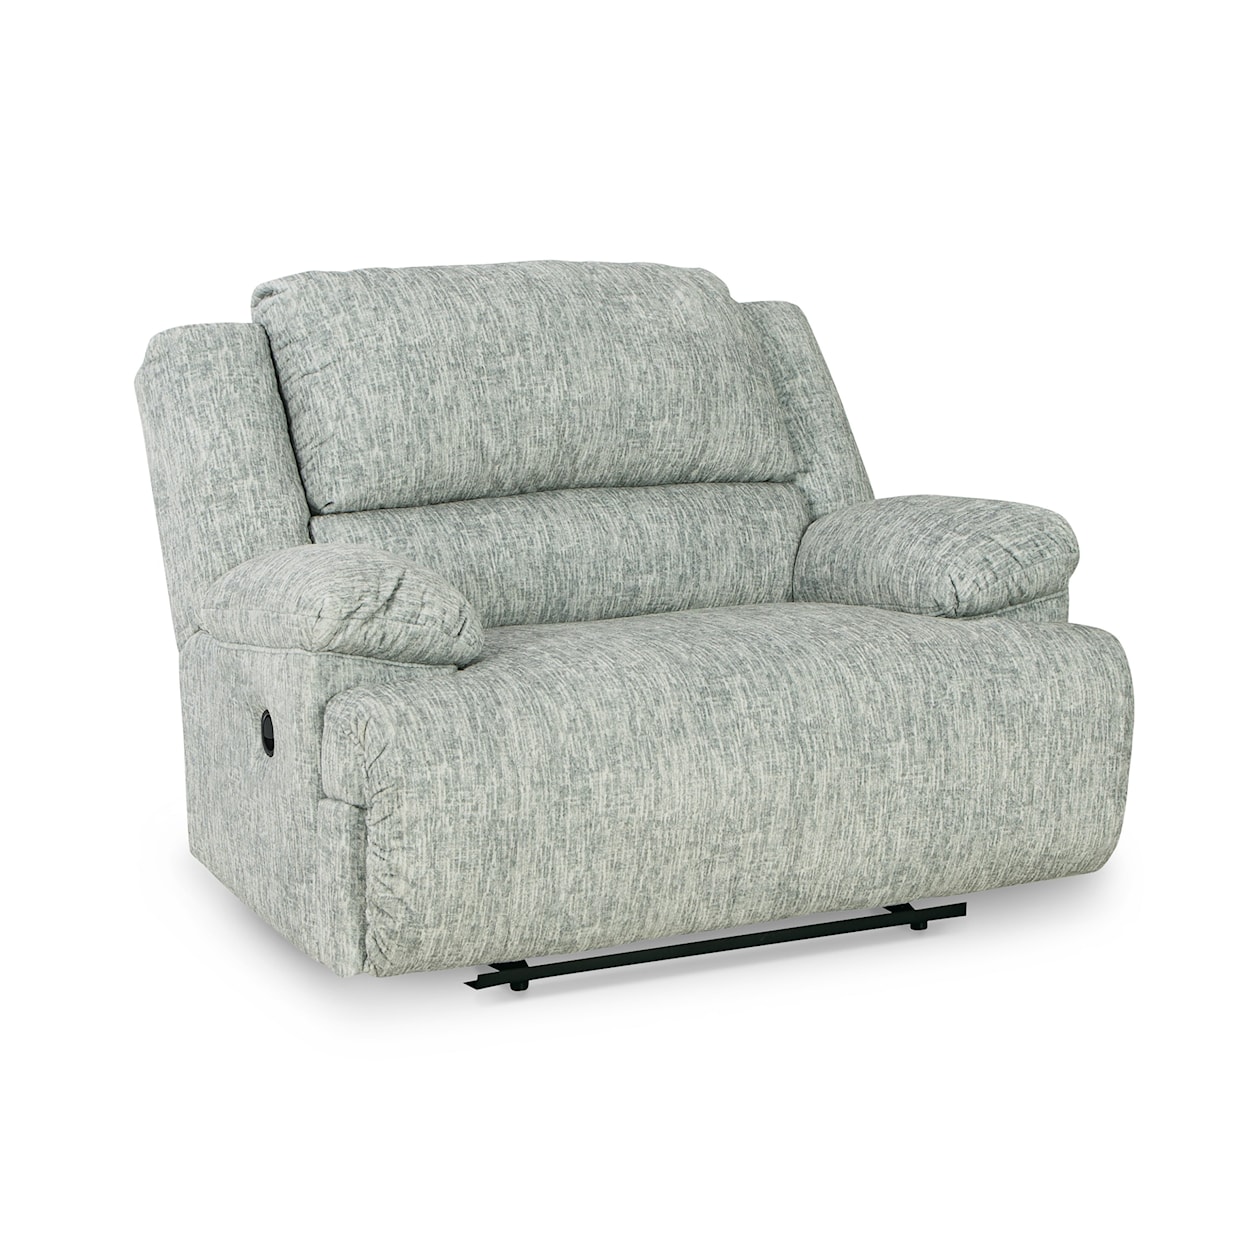 Signature Design by Ashley Furniture McClelland Oversized Recliner